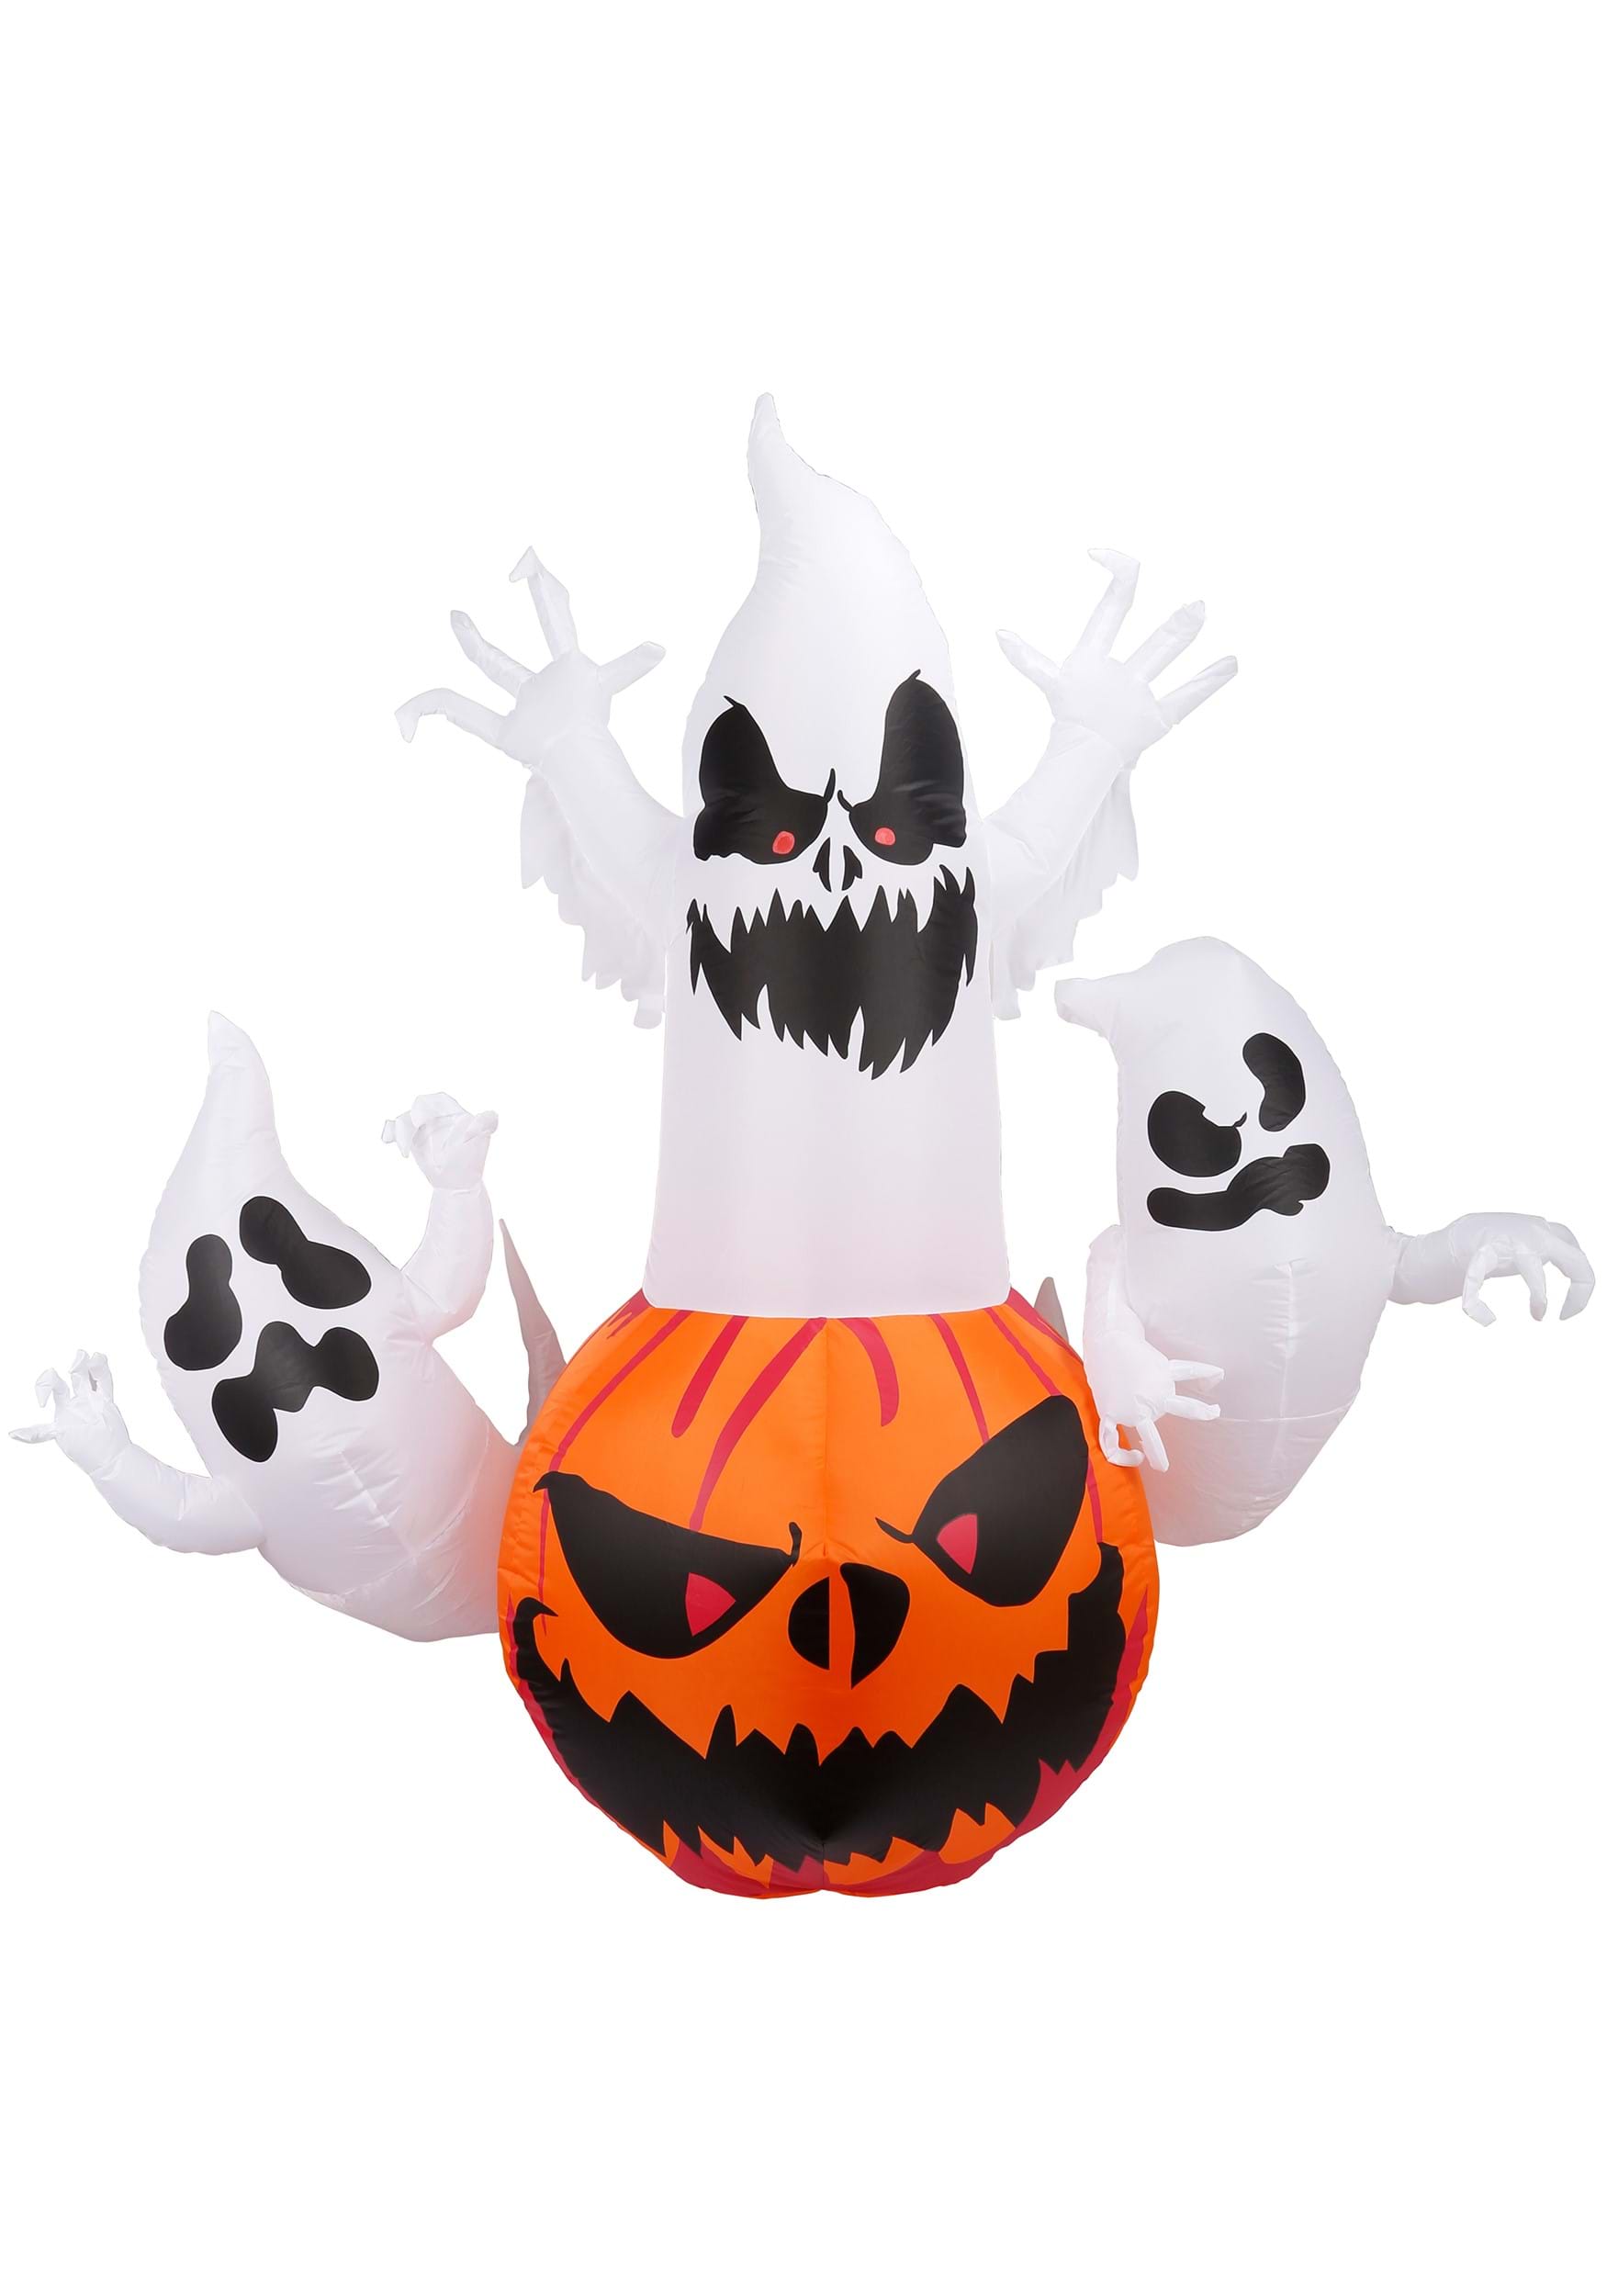 6 Foot Large Ghosts Coming Out Inflatable Decoration